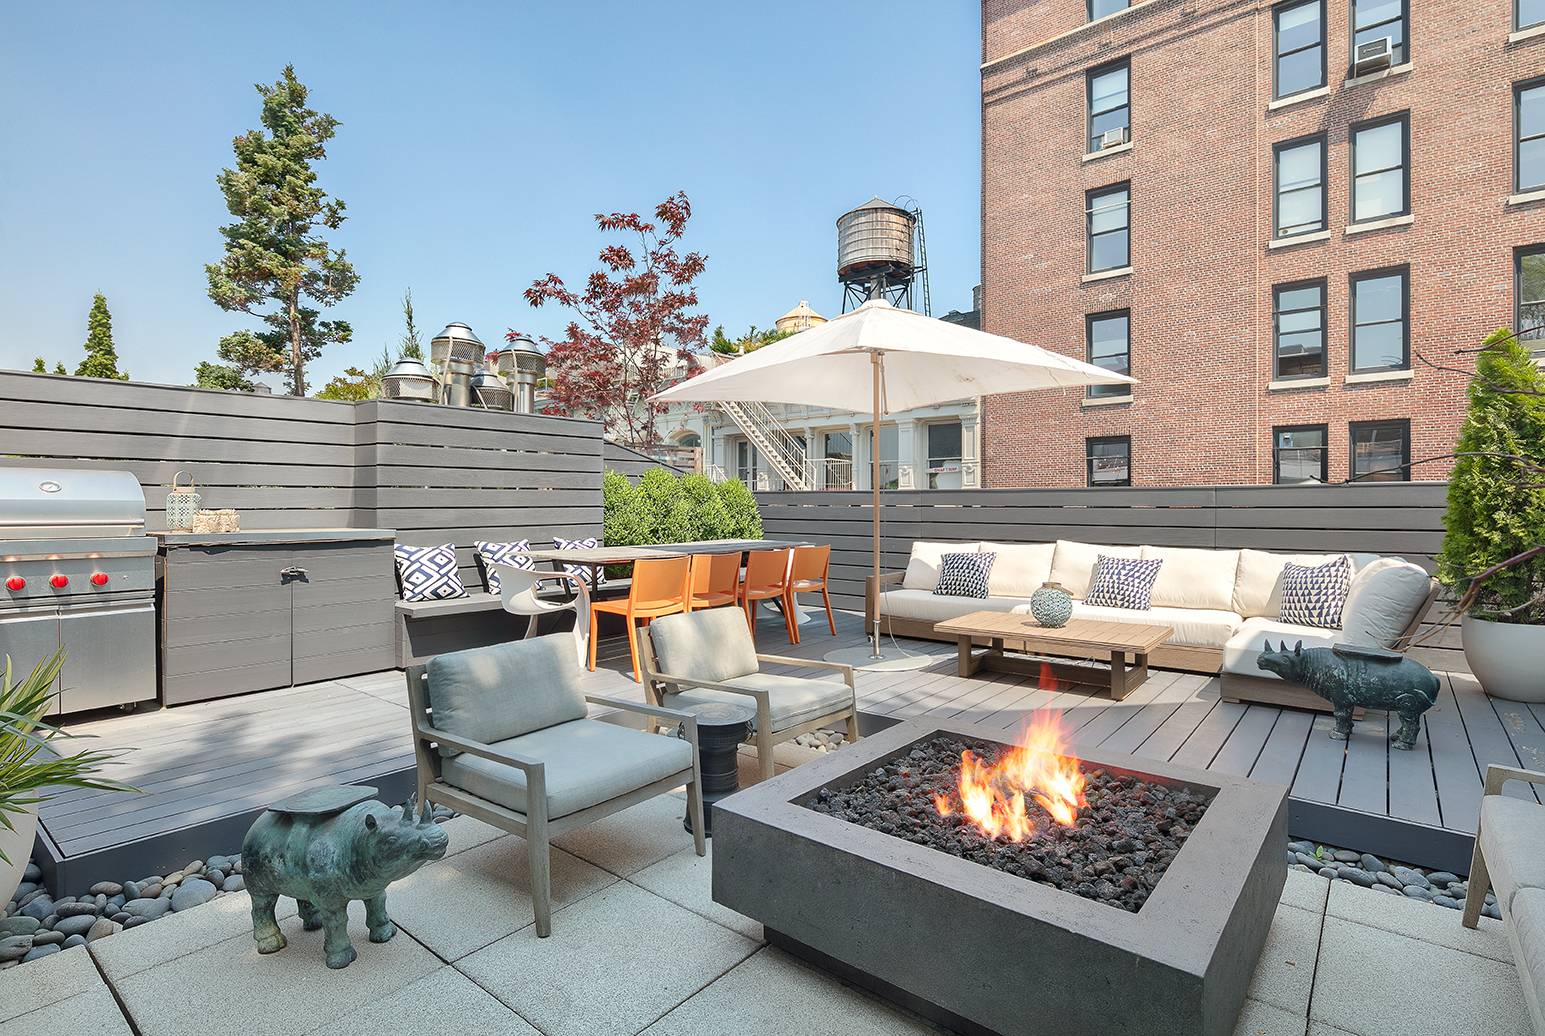 Beautifully Designed 3 4 Bedroom duplex penthouse loft with outdoor entertaining space on 3 different levels.